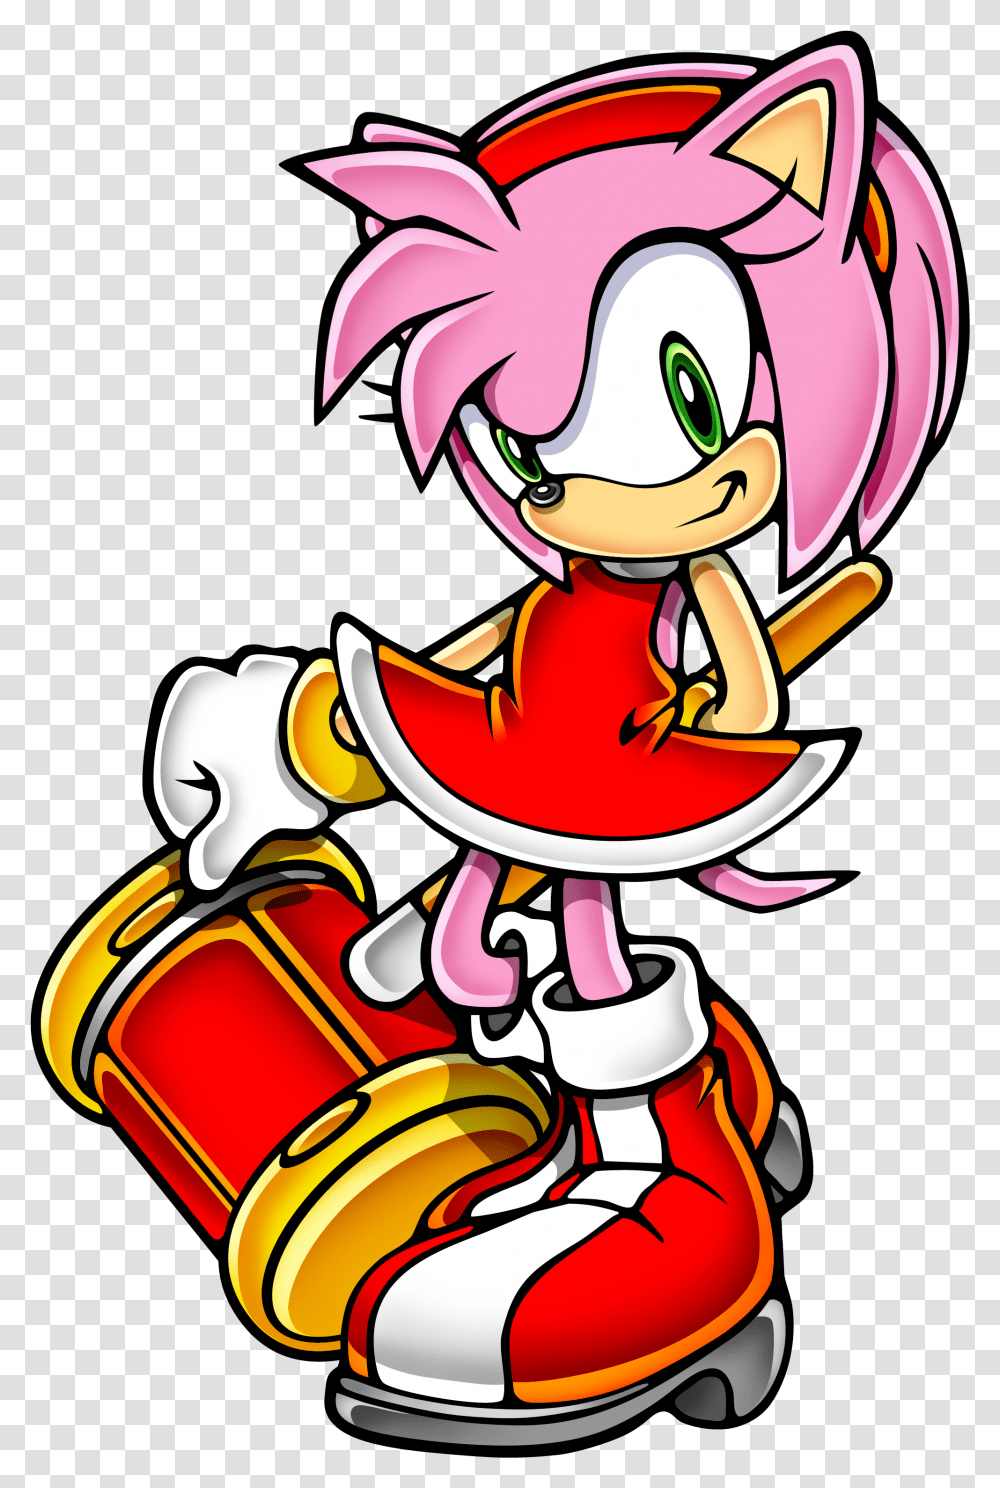 Sonic News Network Amy Rose Sonic Advance, Food, Ketchup Transparent Png